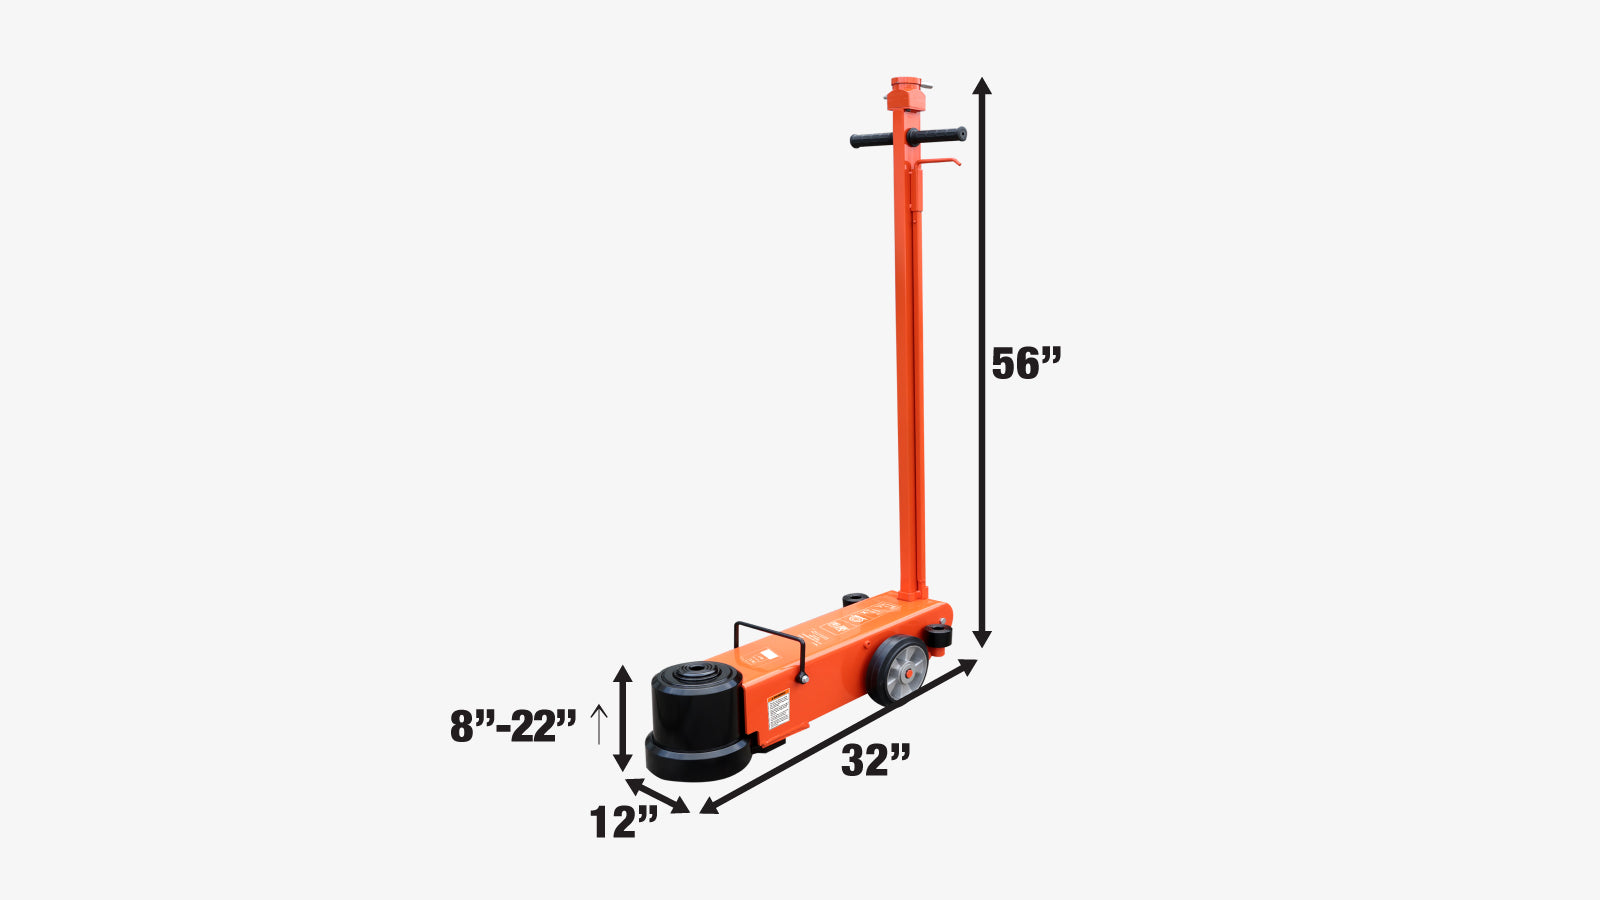 TMG Industrial 50 Ton Air Hydraulic Two Stage Truck Jack, 25 Ton Self-Retracting Ram, Adjustable 90°-180°, TMG-AJT50-specifications-image